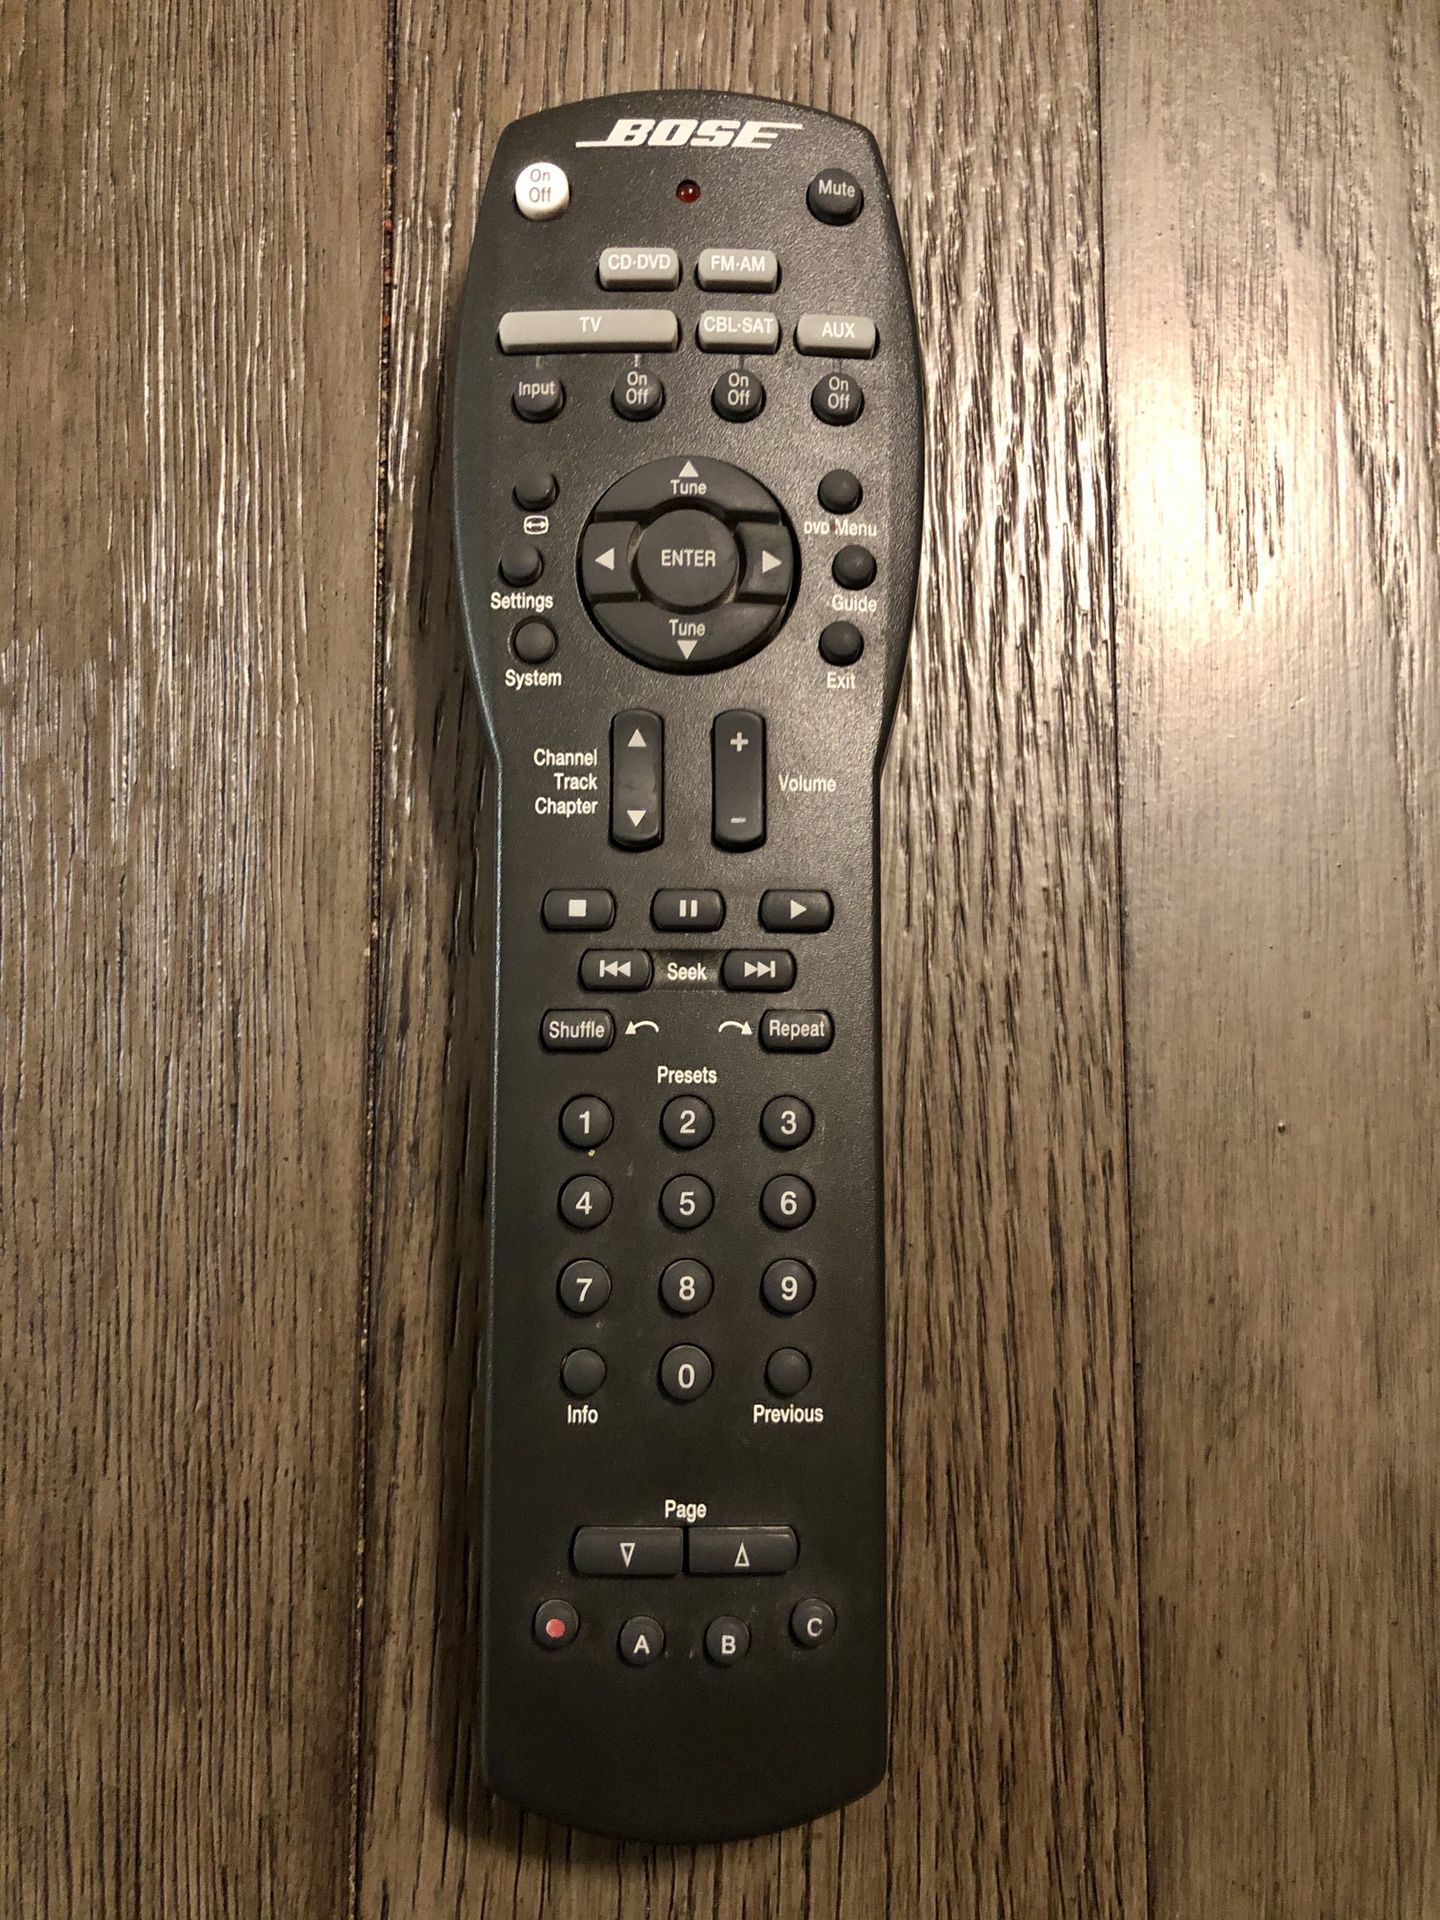 Bose 321 Remote Control for AV 3-2-1 Media Center Series II or III- TESTED